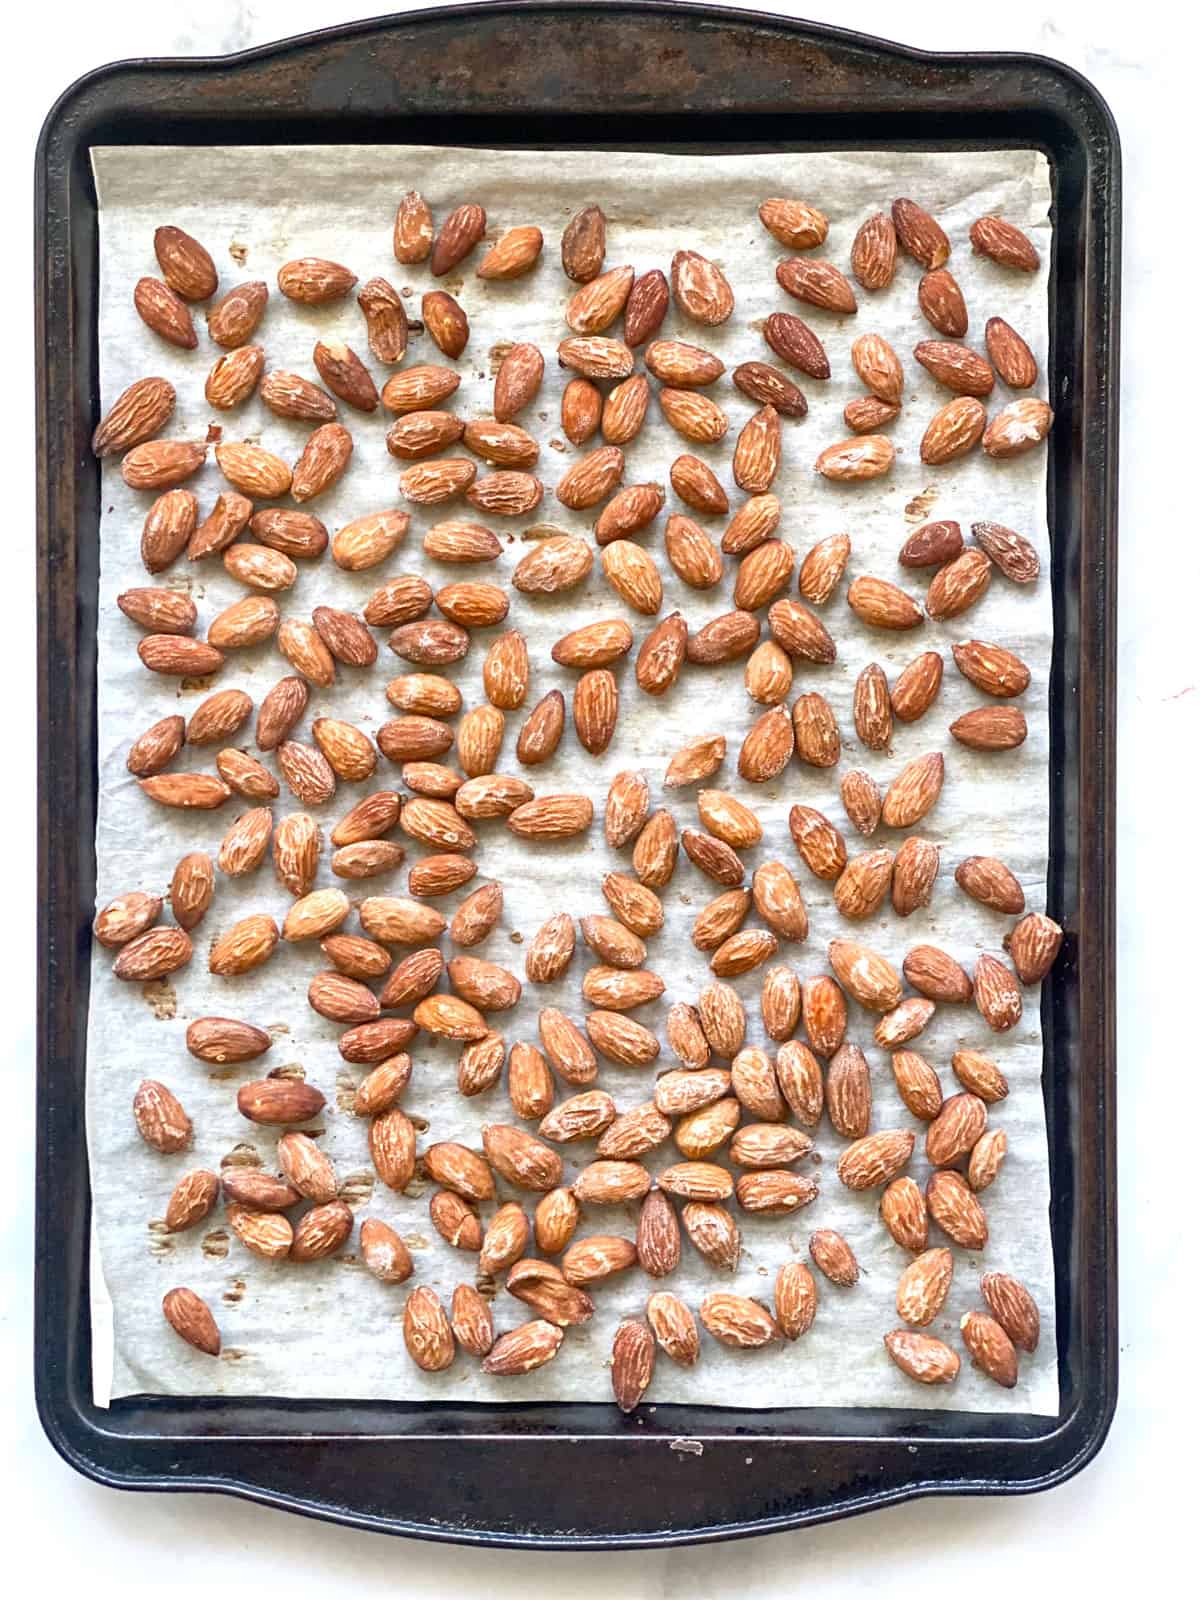 A parchment lined baking sheet with salted roasted almonds on it